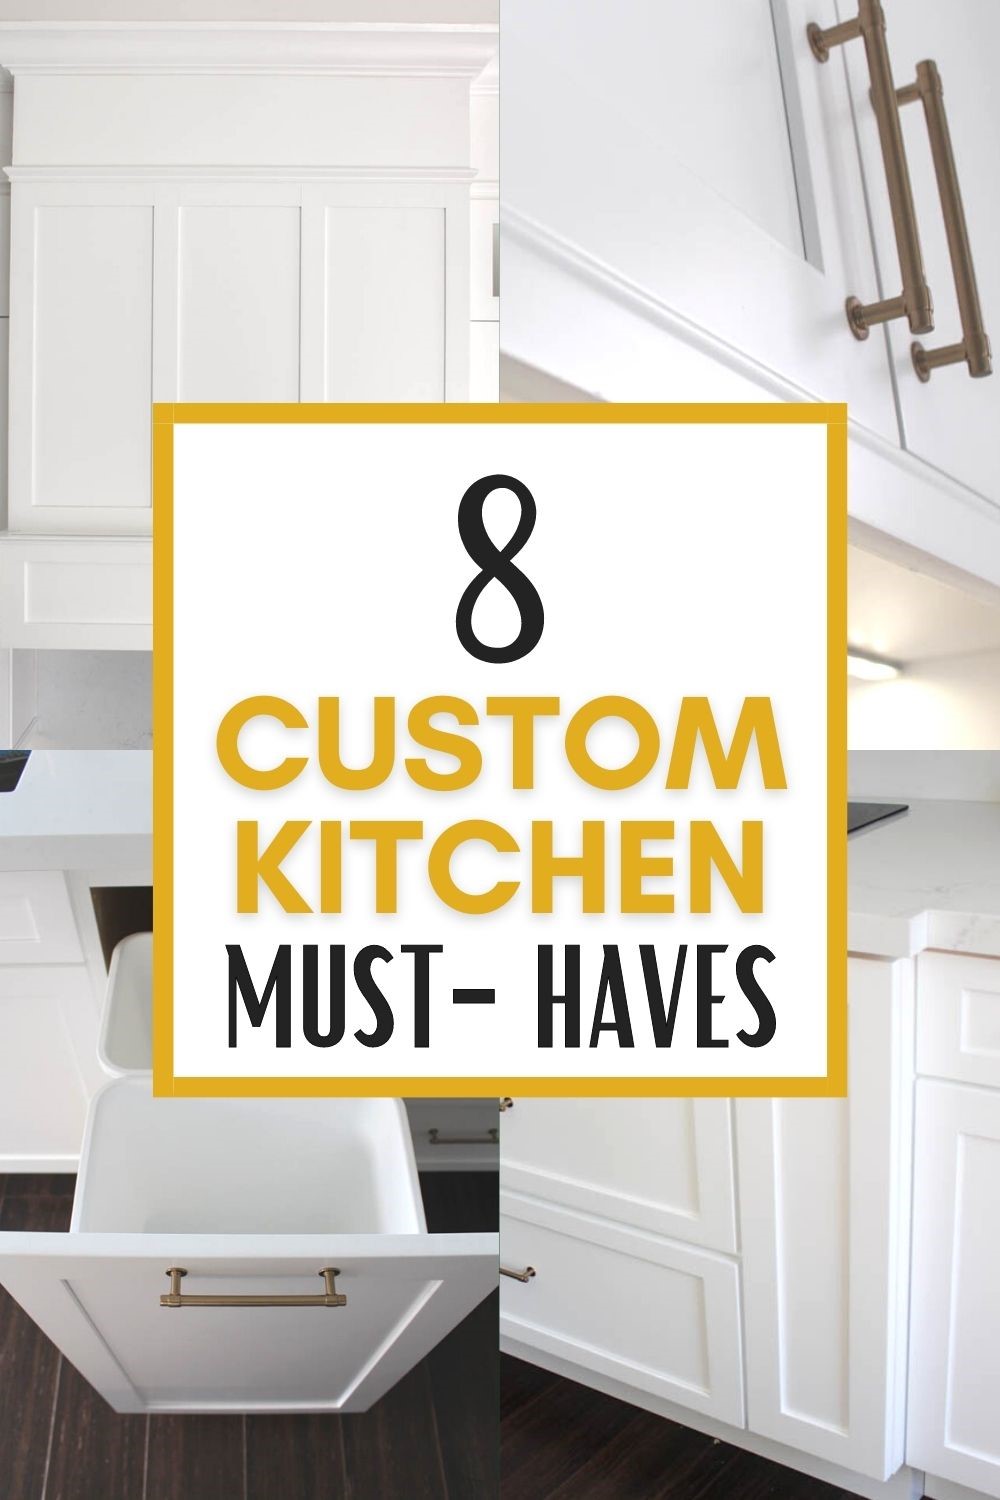 10 Must-Haves for Designing a New Kitchen